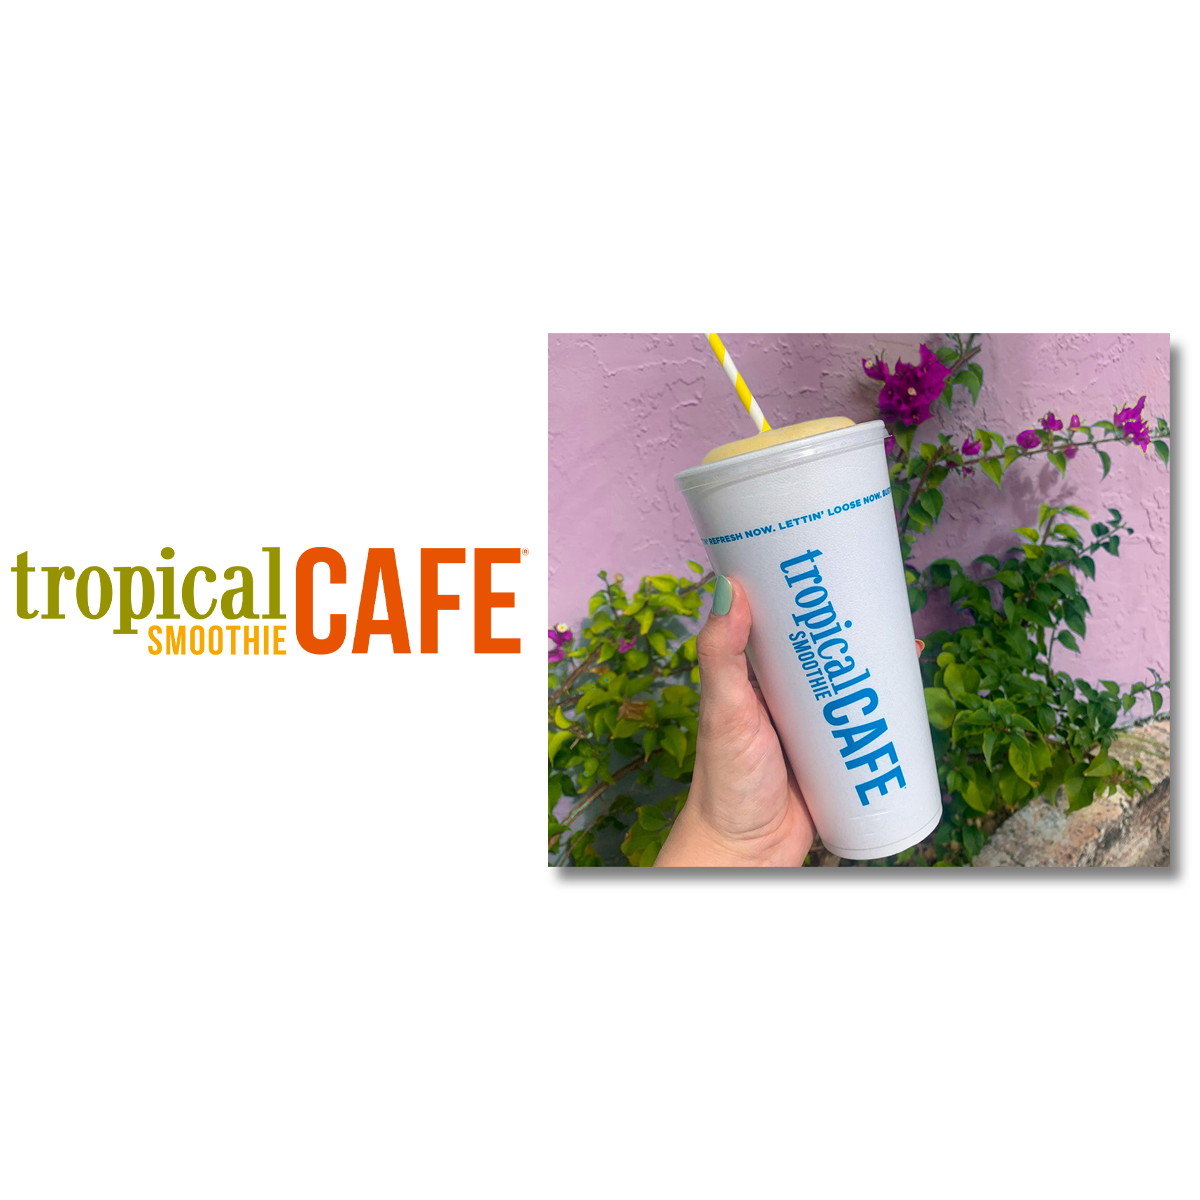 Free Smoothie from Tropical Smoothie Cafe